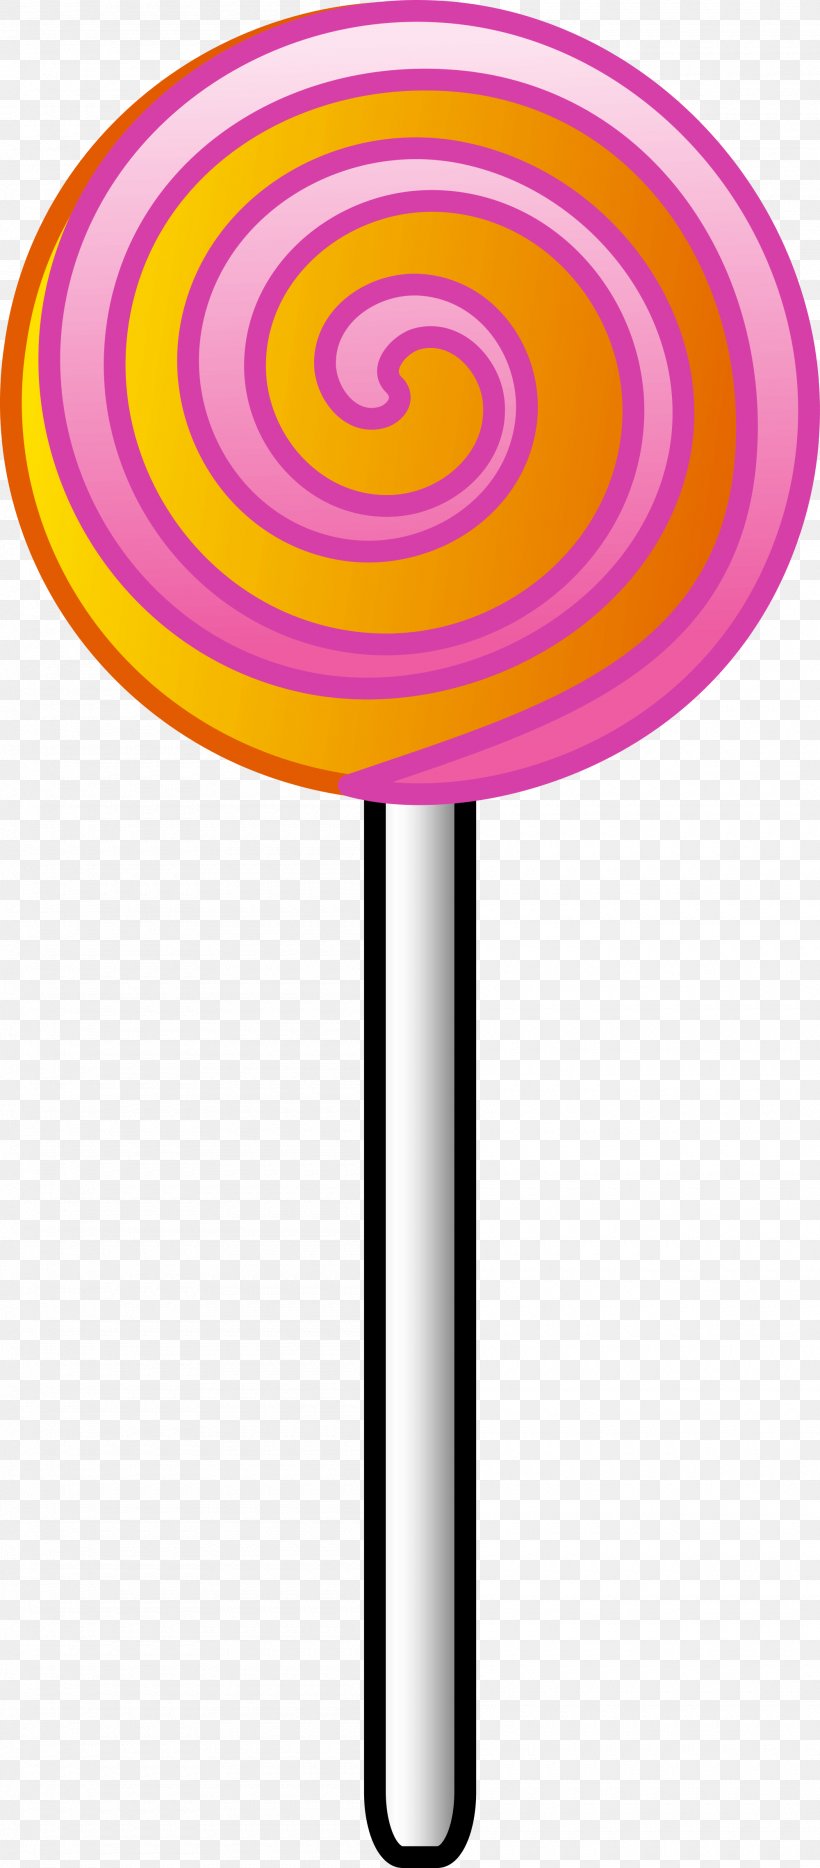 Lollipop Candy Cane Clip Art, PNG, 2000x4558px, Lollipop, Avatar, Candy, Candy Cane, Hard Candy Download Free